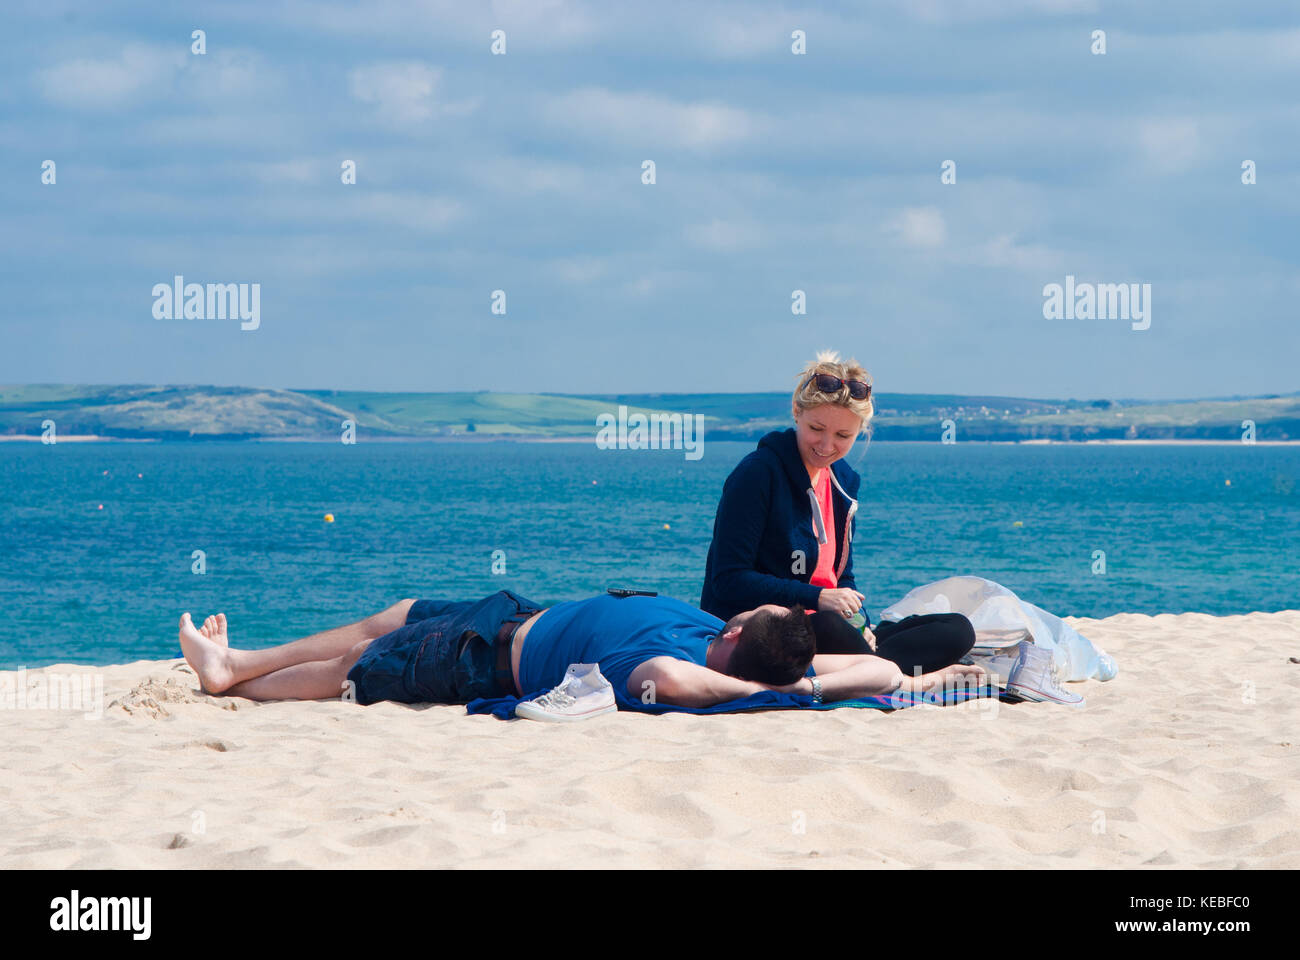 A couple relaxing on the beach. Stock Photo